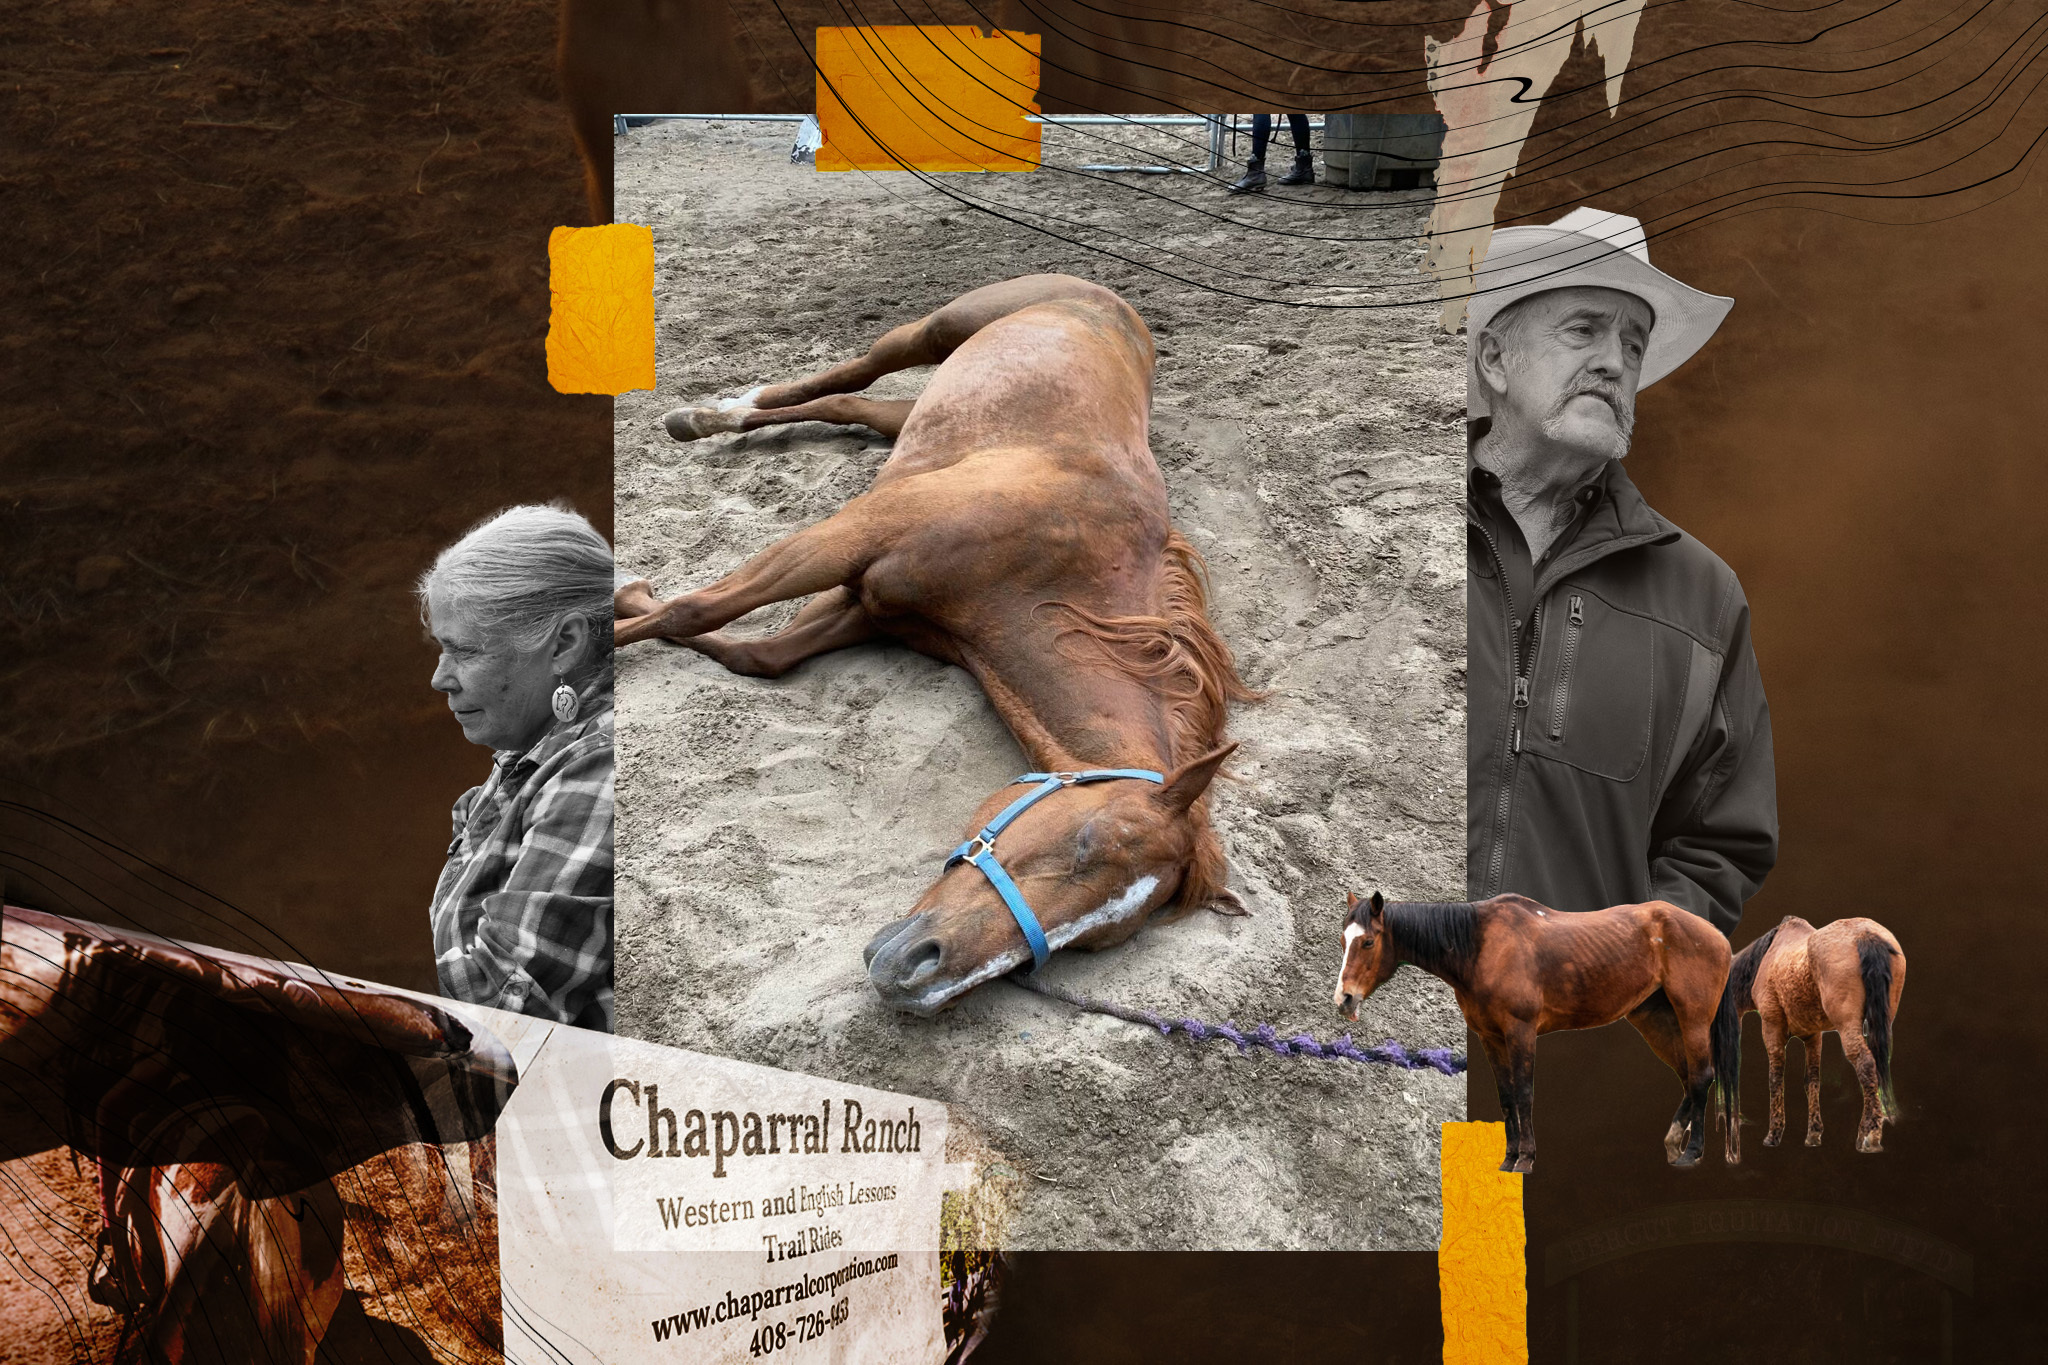 Collage with a ranch theme, including images of an elderly woman, a man, several horses, and a textured background with ranch-related elements.